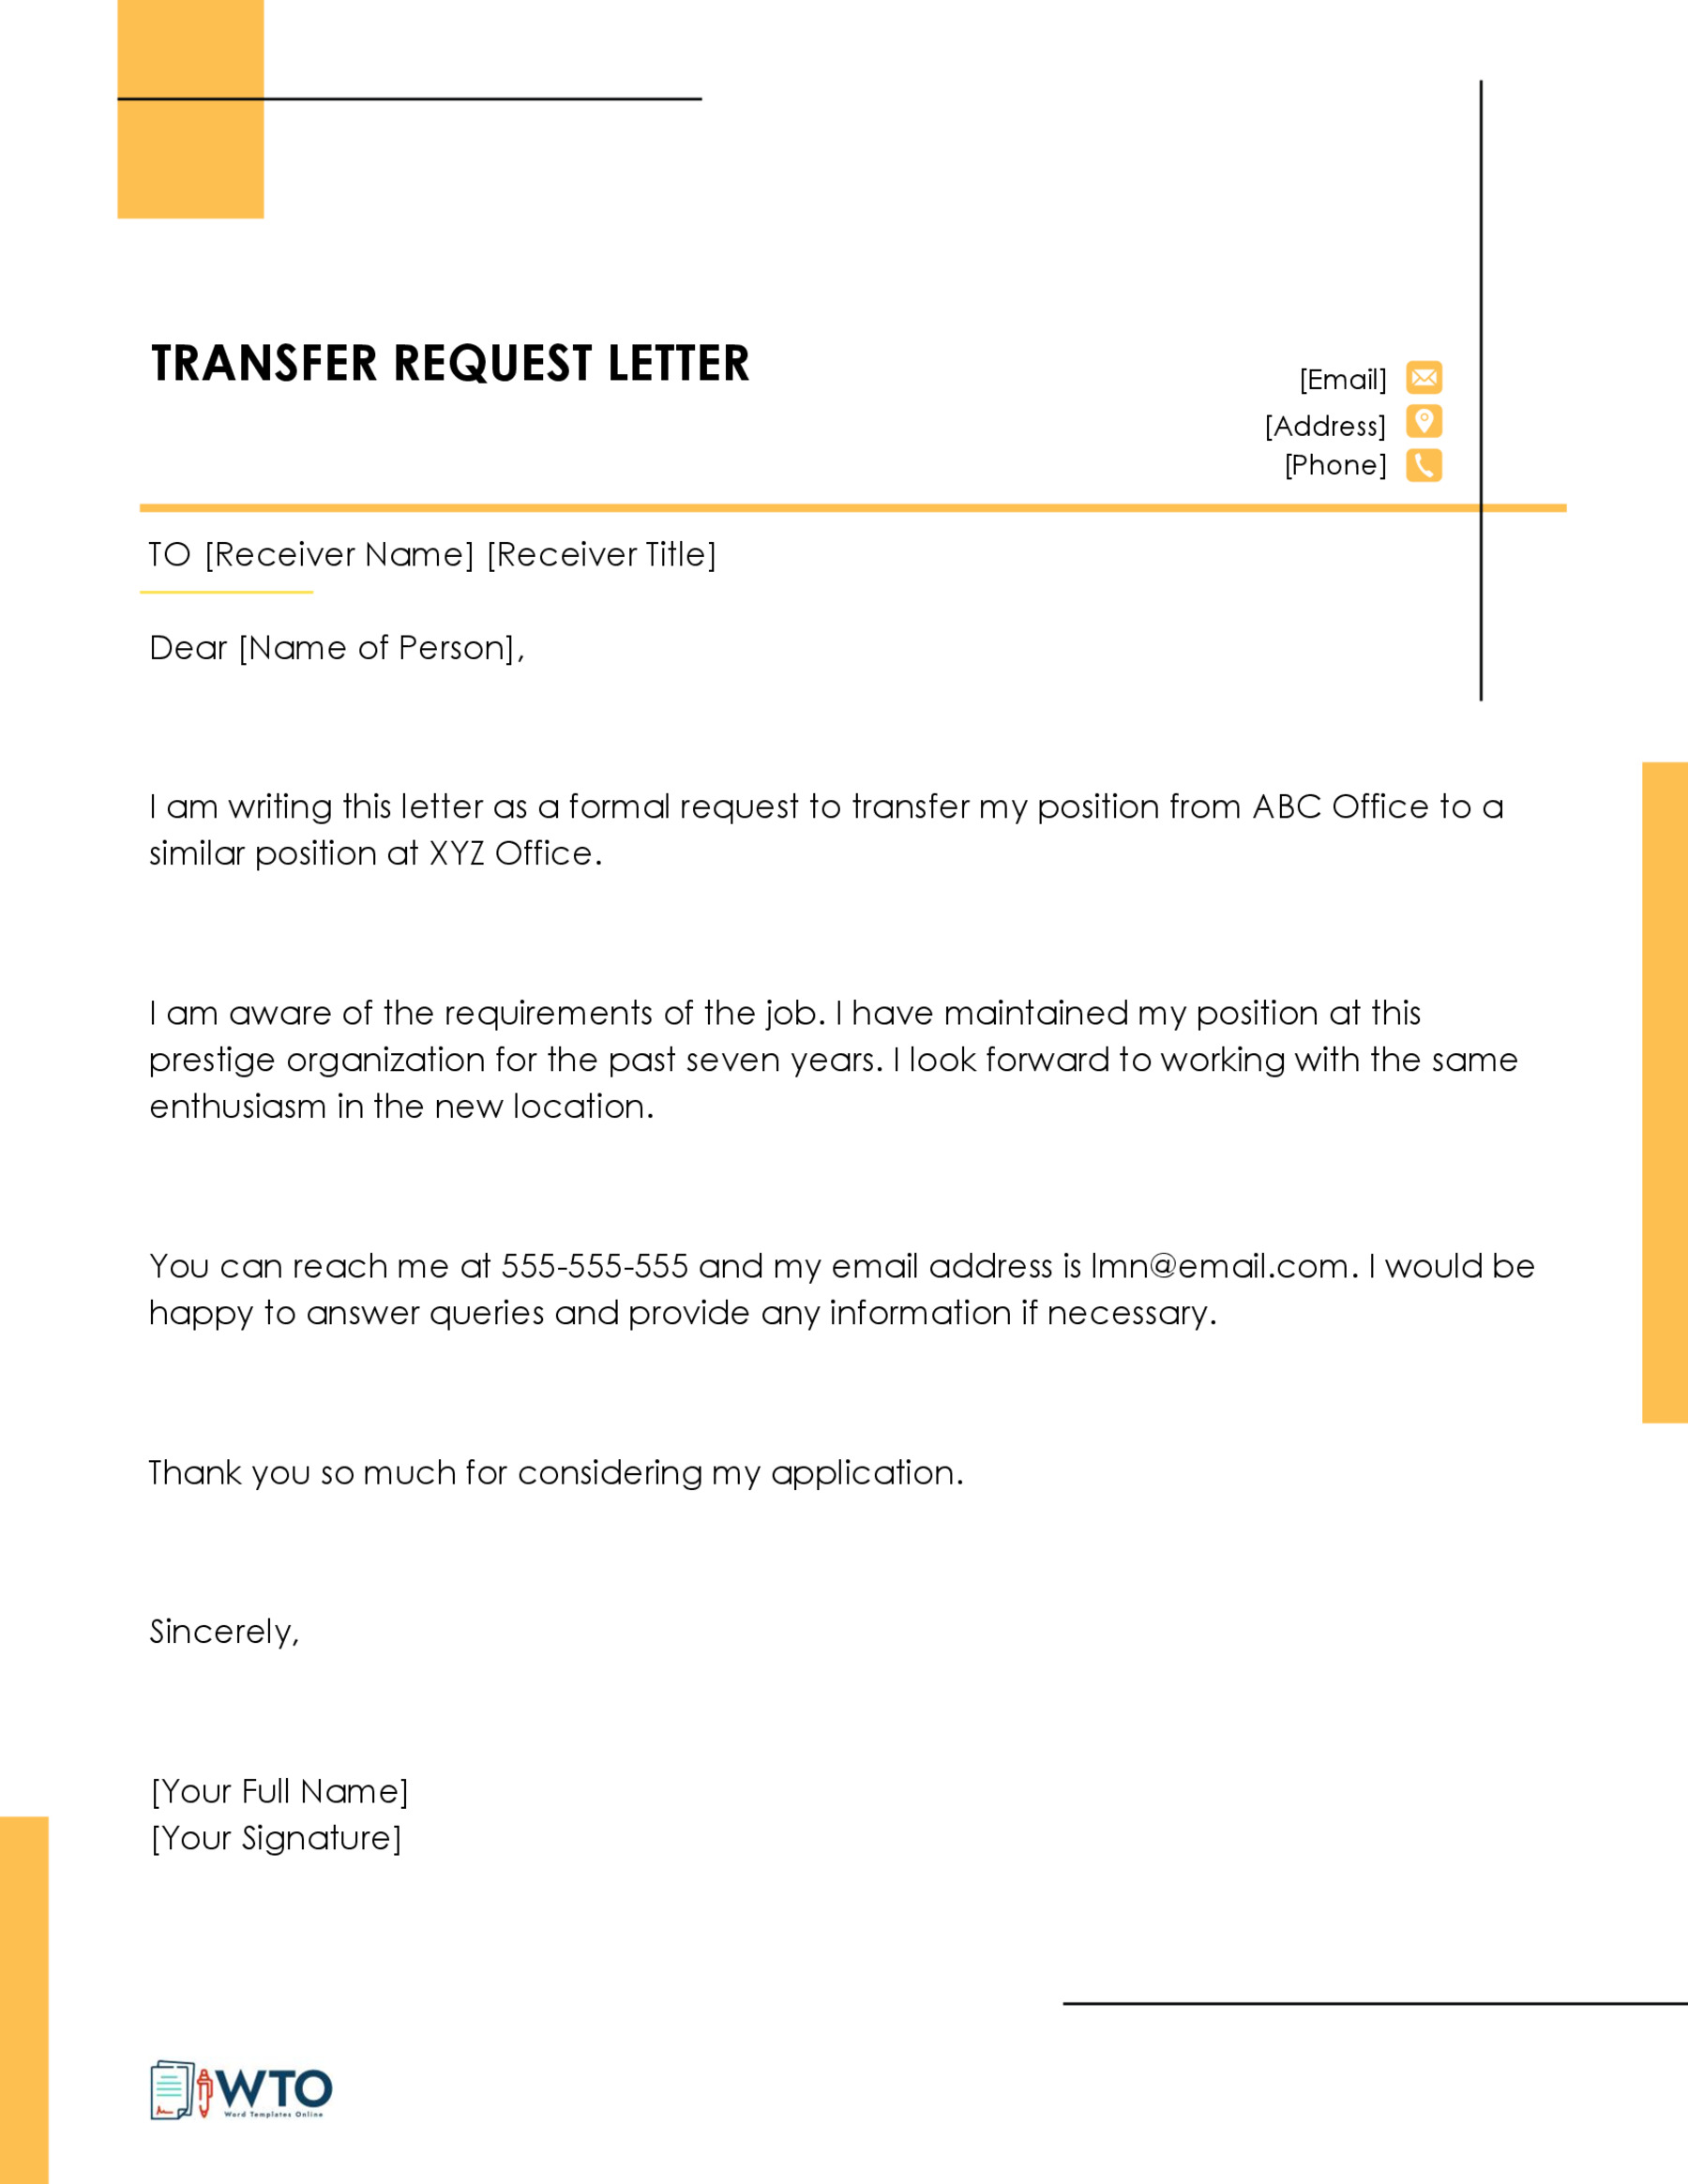 Free Editable Transfer Request Letter Sample 12 in Word Format